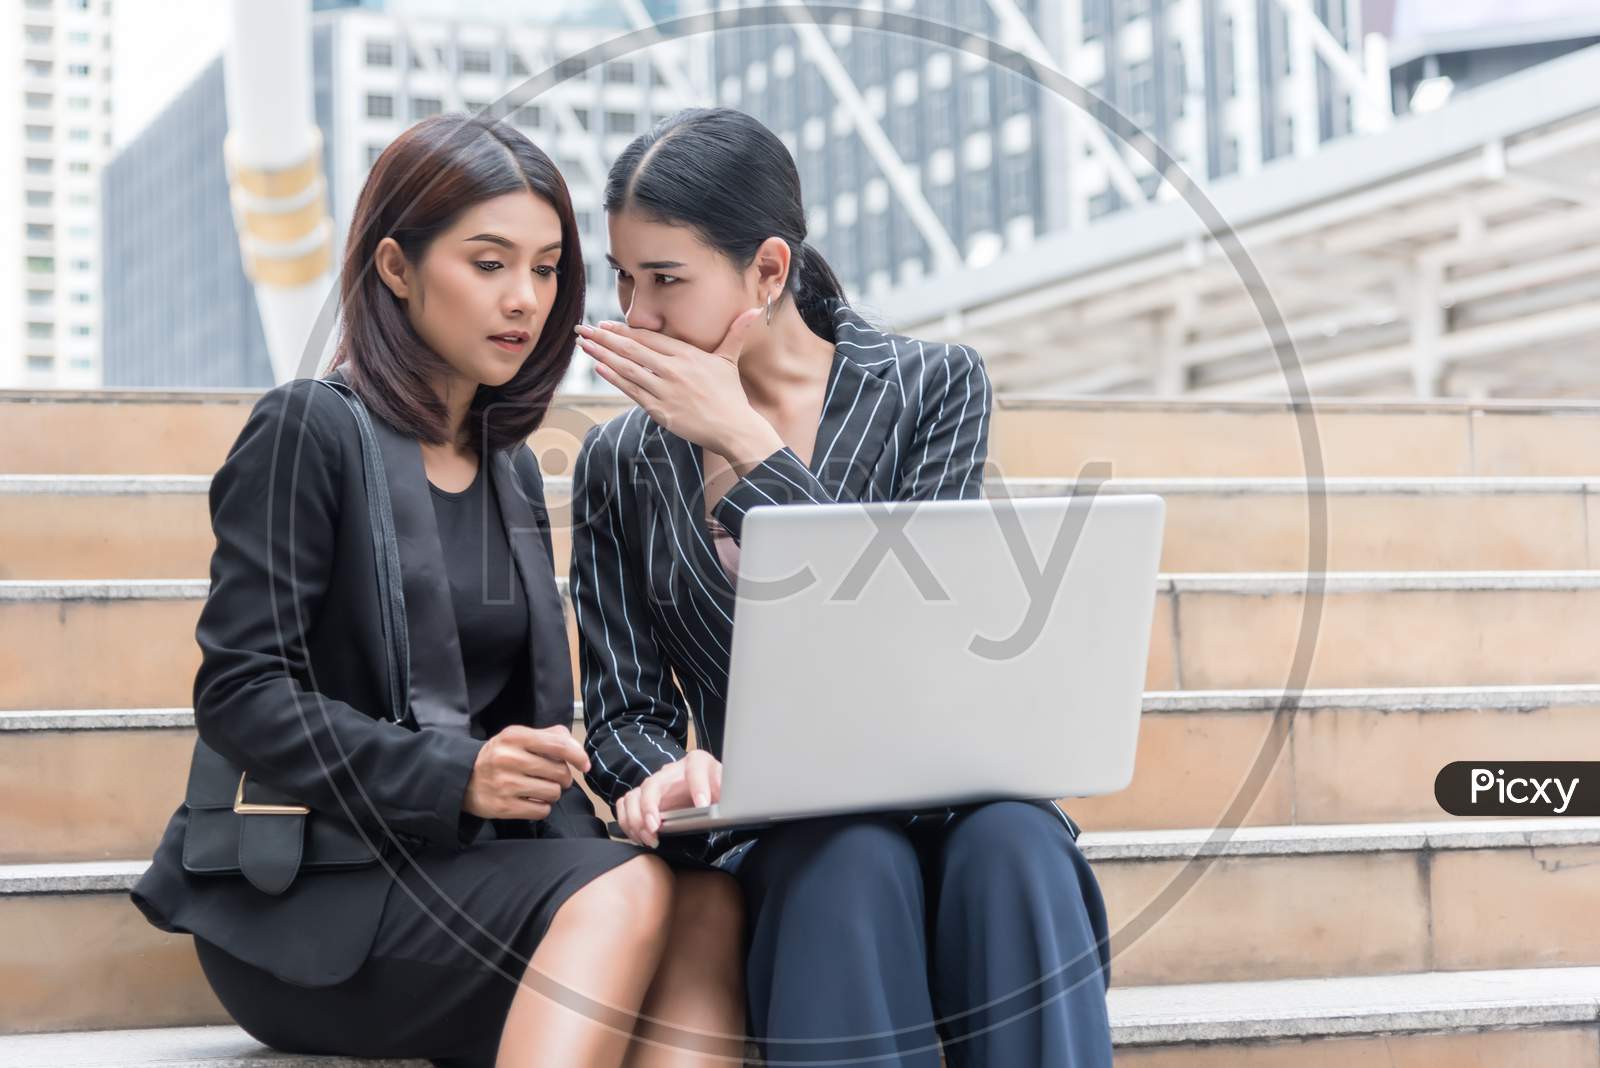 Business Women Gossip While Using Laptop At Outdoor. Business And Coworker Concept